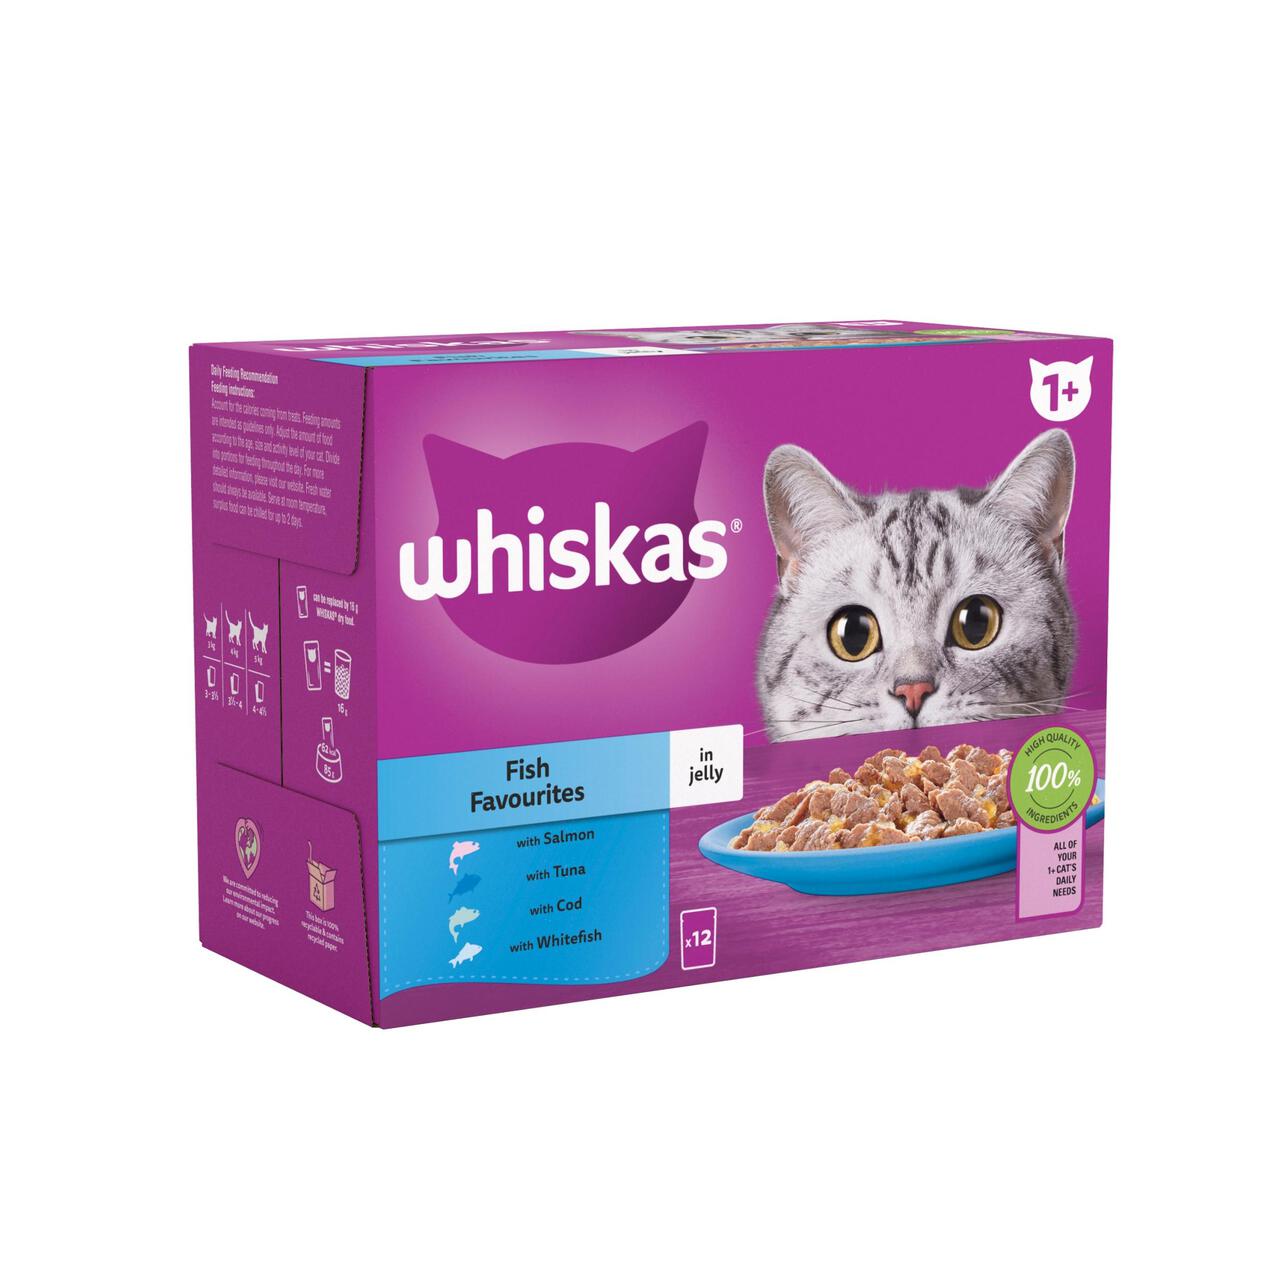 Whiskas 1+ Adult Wet Cat Food Pouches Fish Favourites in Jelly 12 x 85g